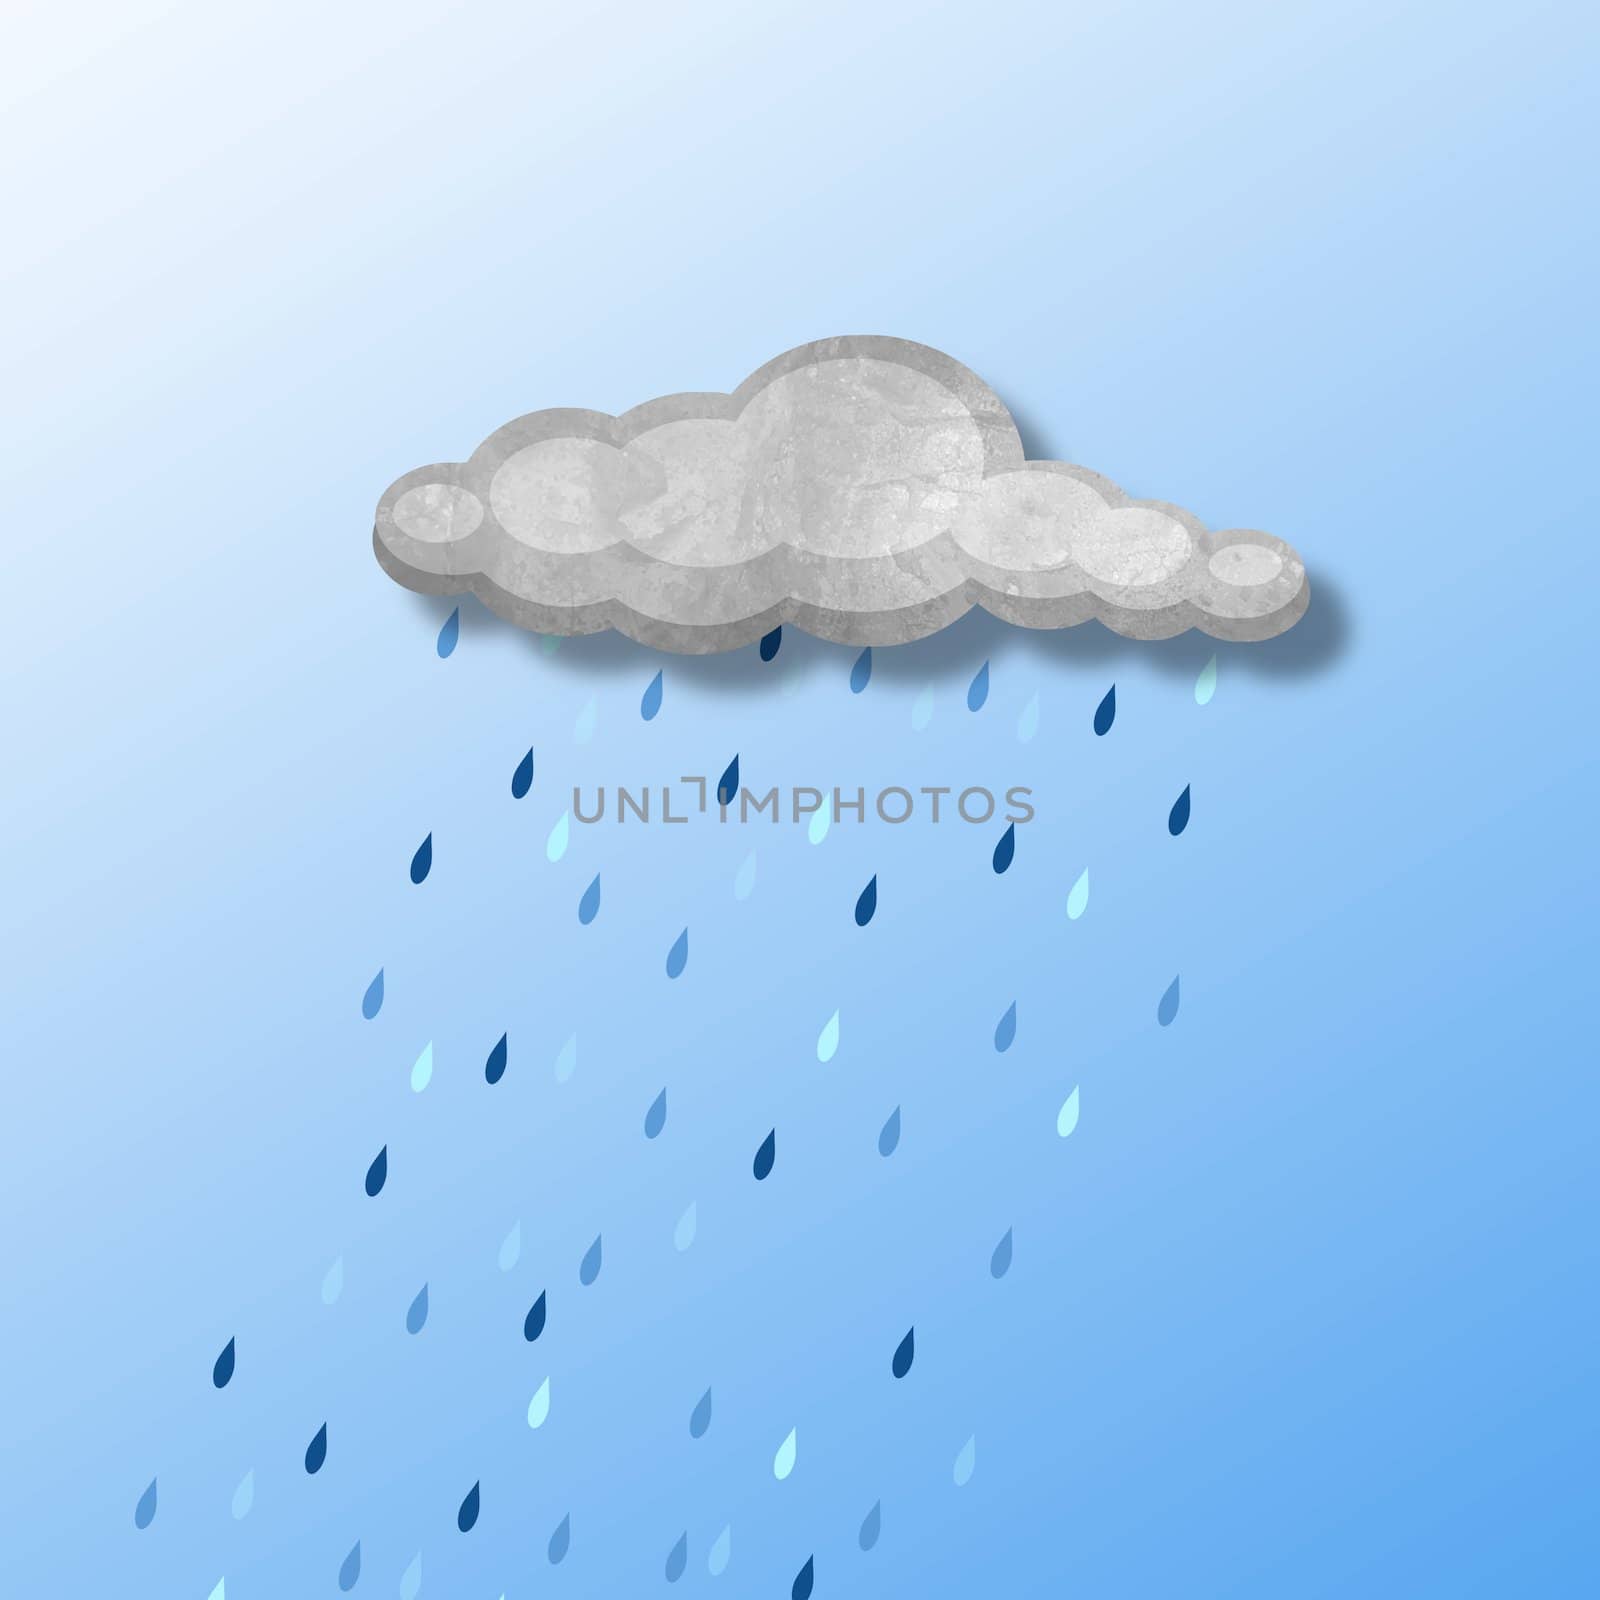 Illustration of a cloud with rain